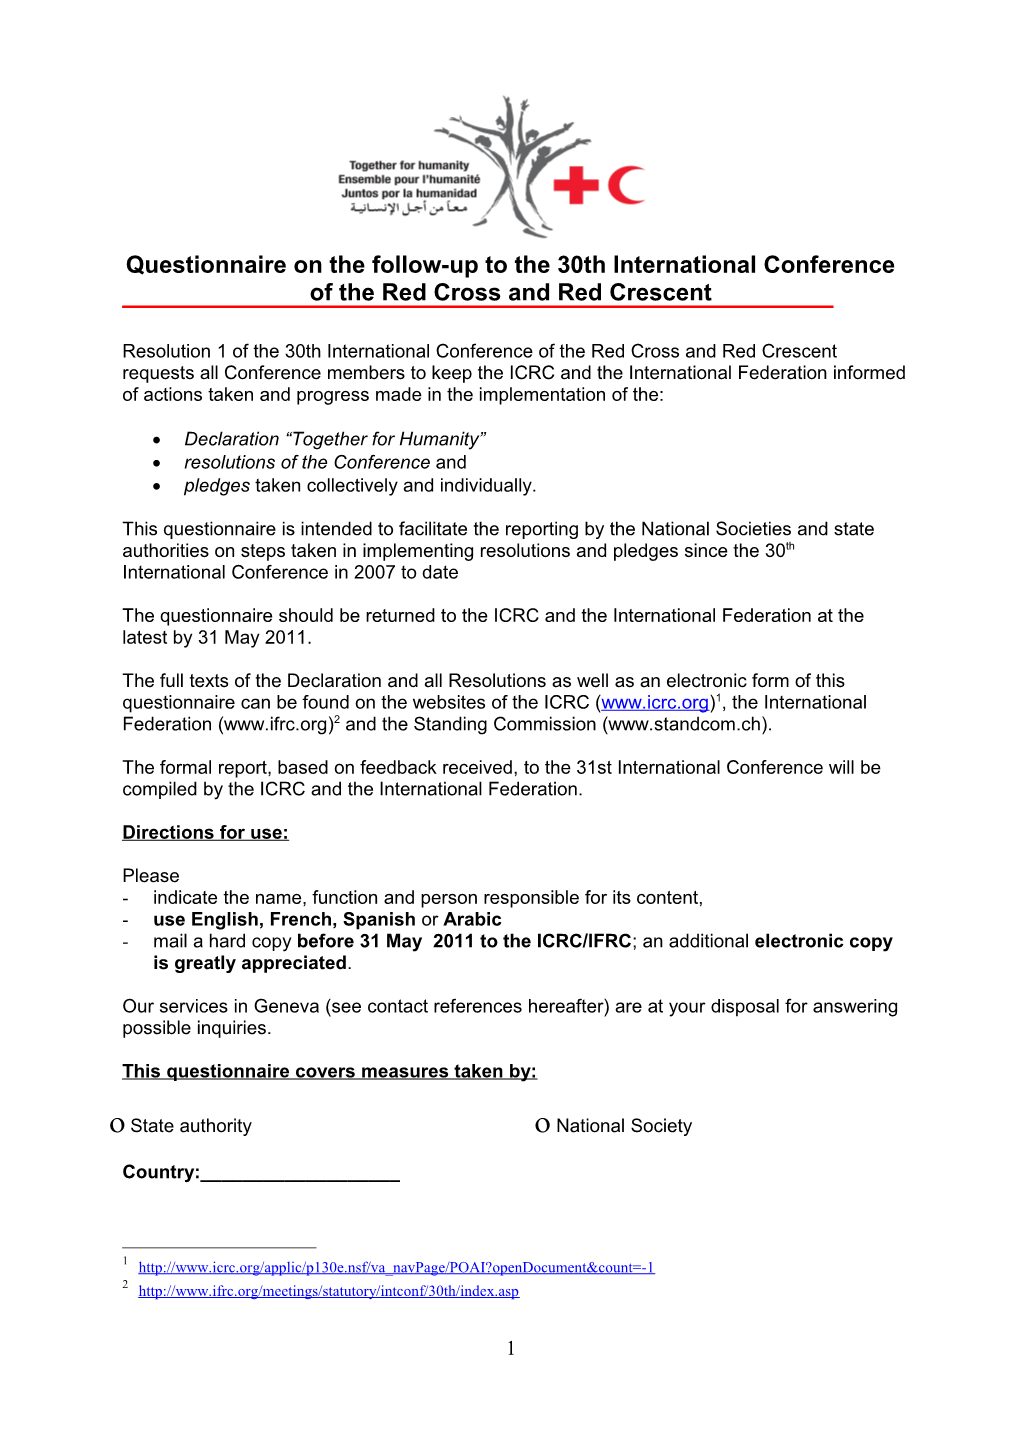 Questionnaire on the Follow-Up to the 30Th International Conference of the Red Cross And